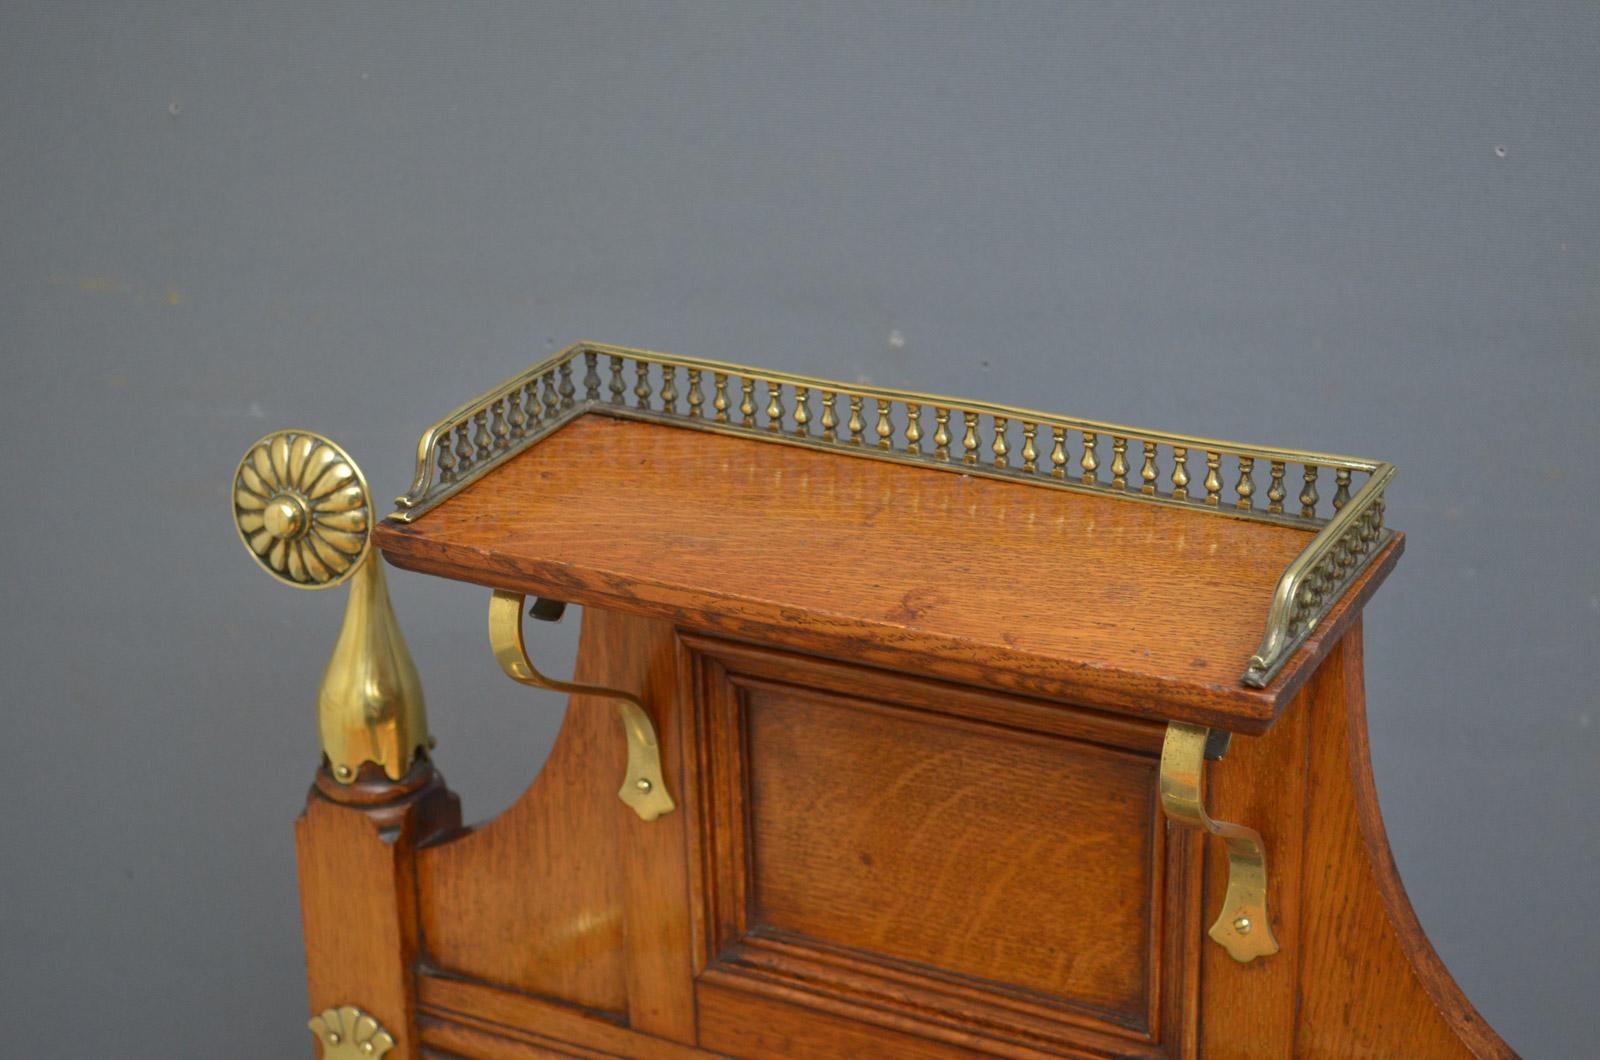 Sn4444 stylish late Victorian umbrella stand in the manner of James Schoolbred, having brass gallery to the shelf over moulded recessed panels and turned columns all fitted with decorative brasses and original drip tray, all in excellent original